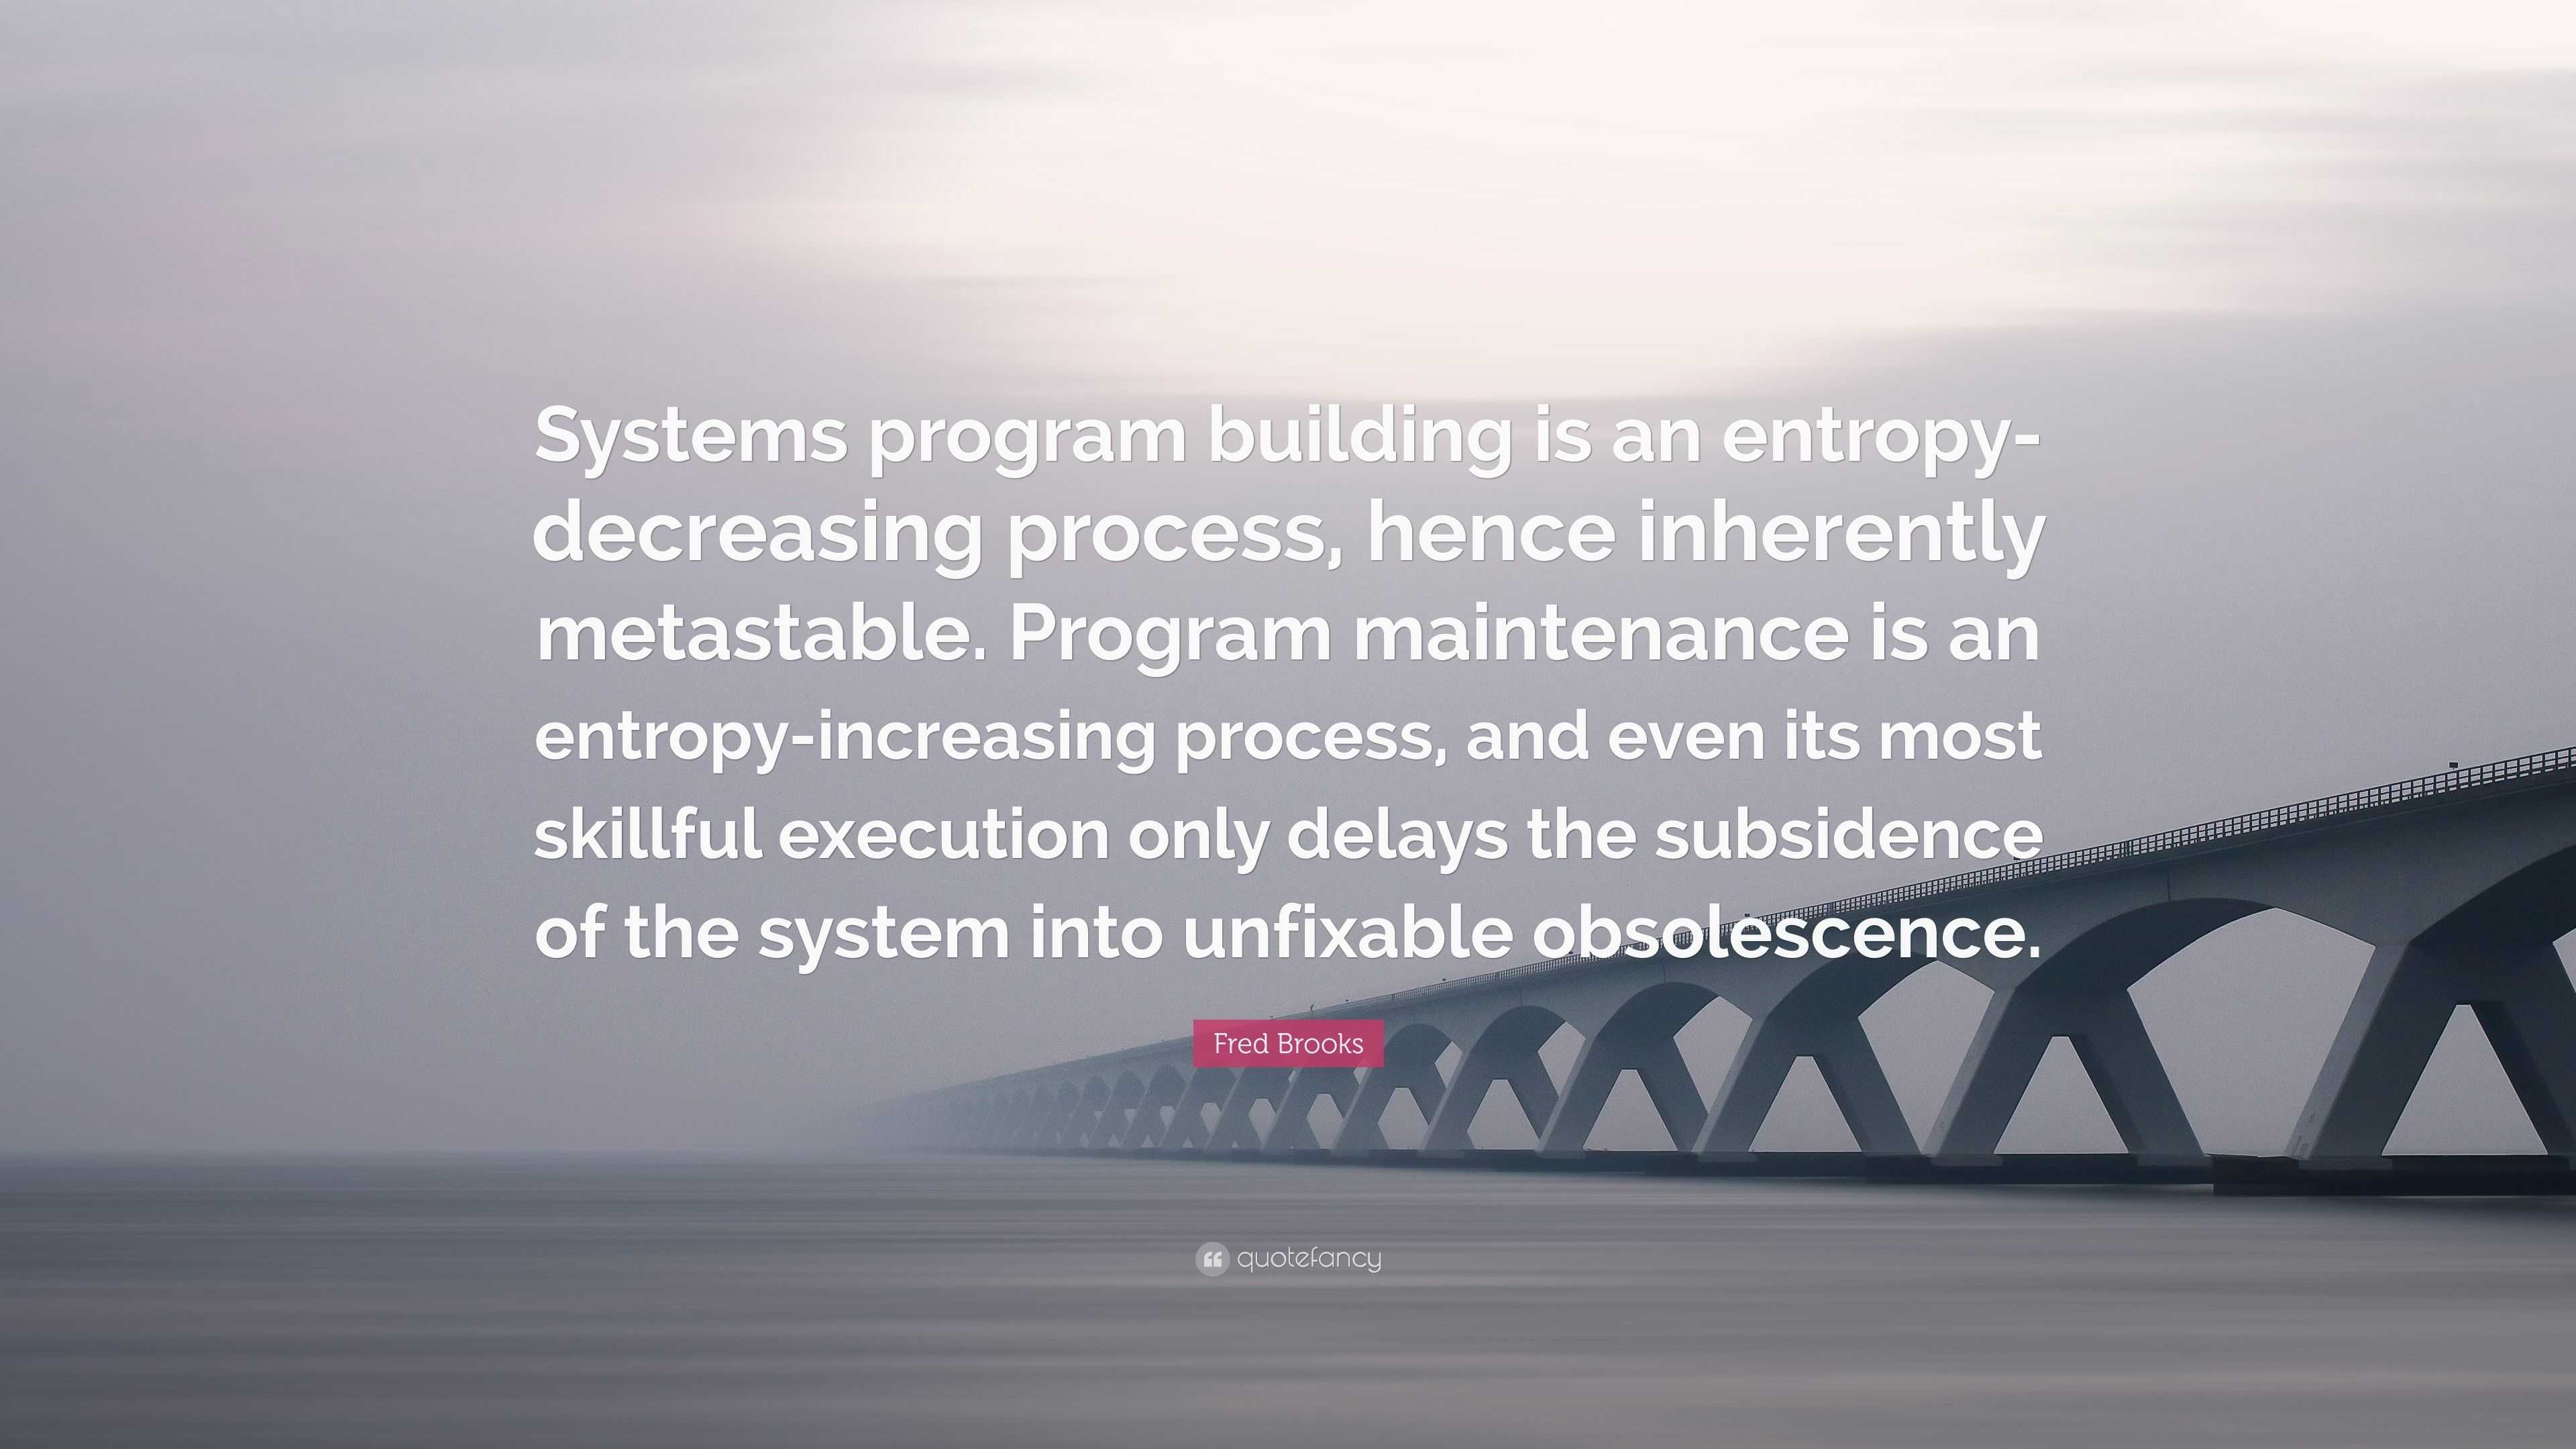 in which of these systems is the entropy decreasing